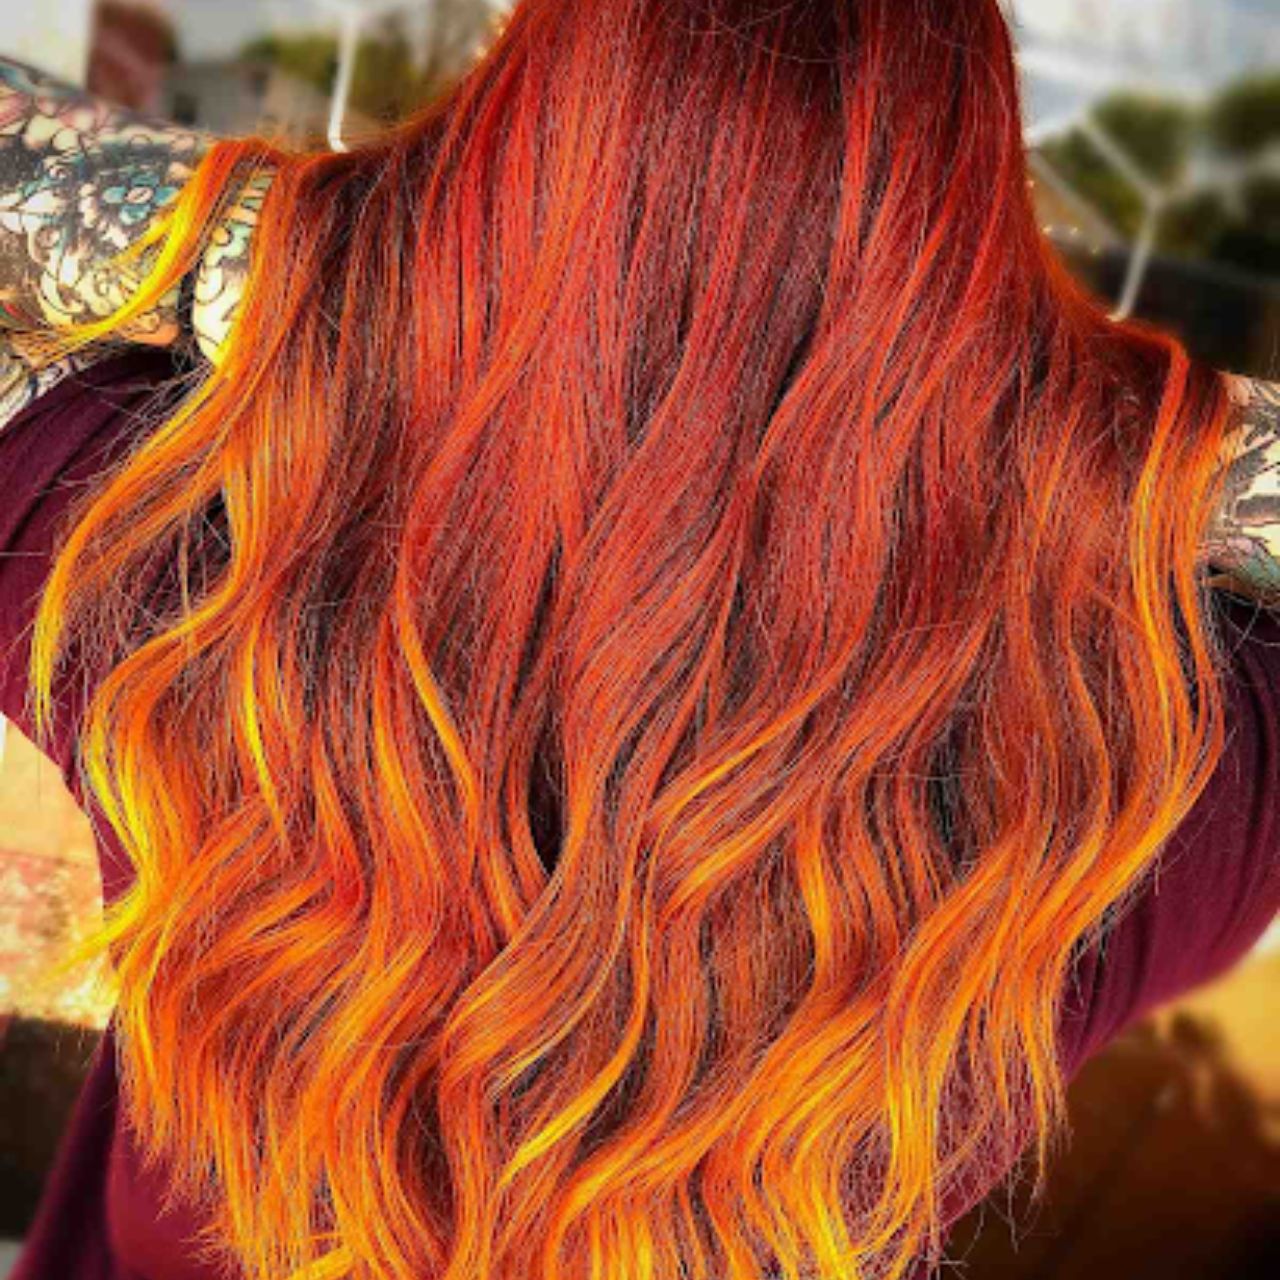 Burnt Orange hair color with red lock